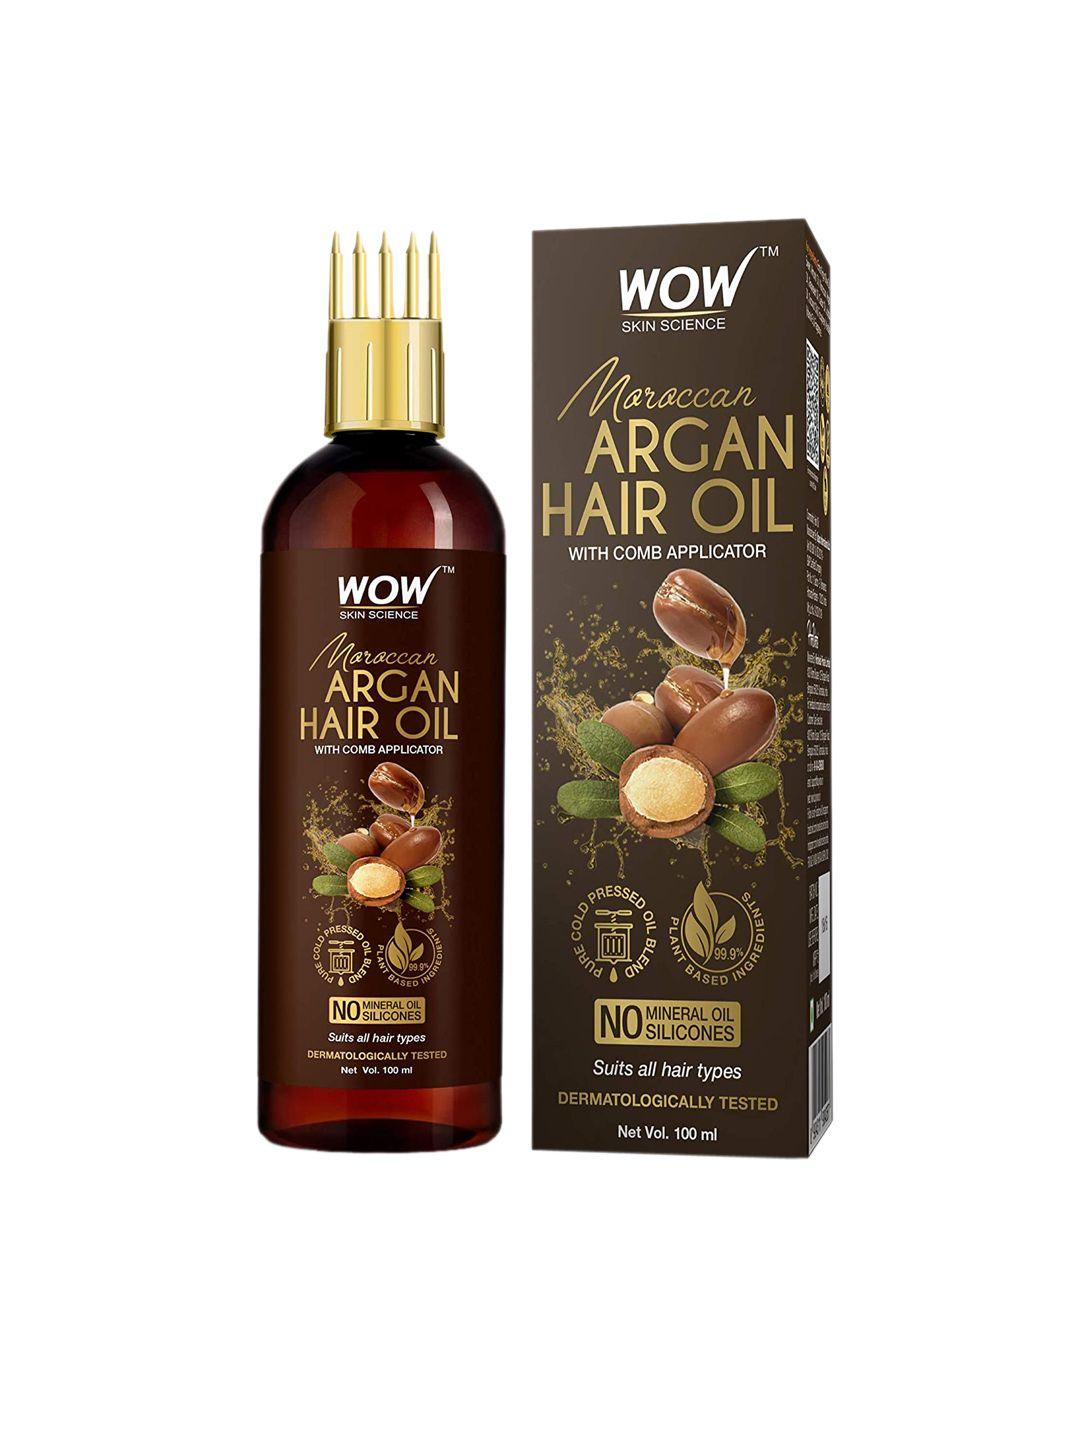 wow skin science moroccan argan hair oil with comb applicator 100 ml